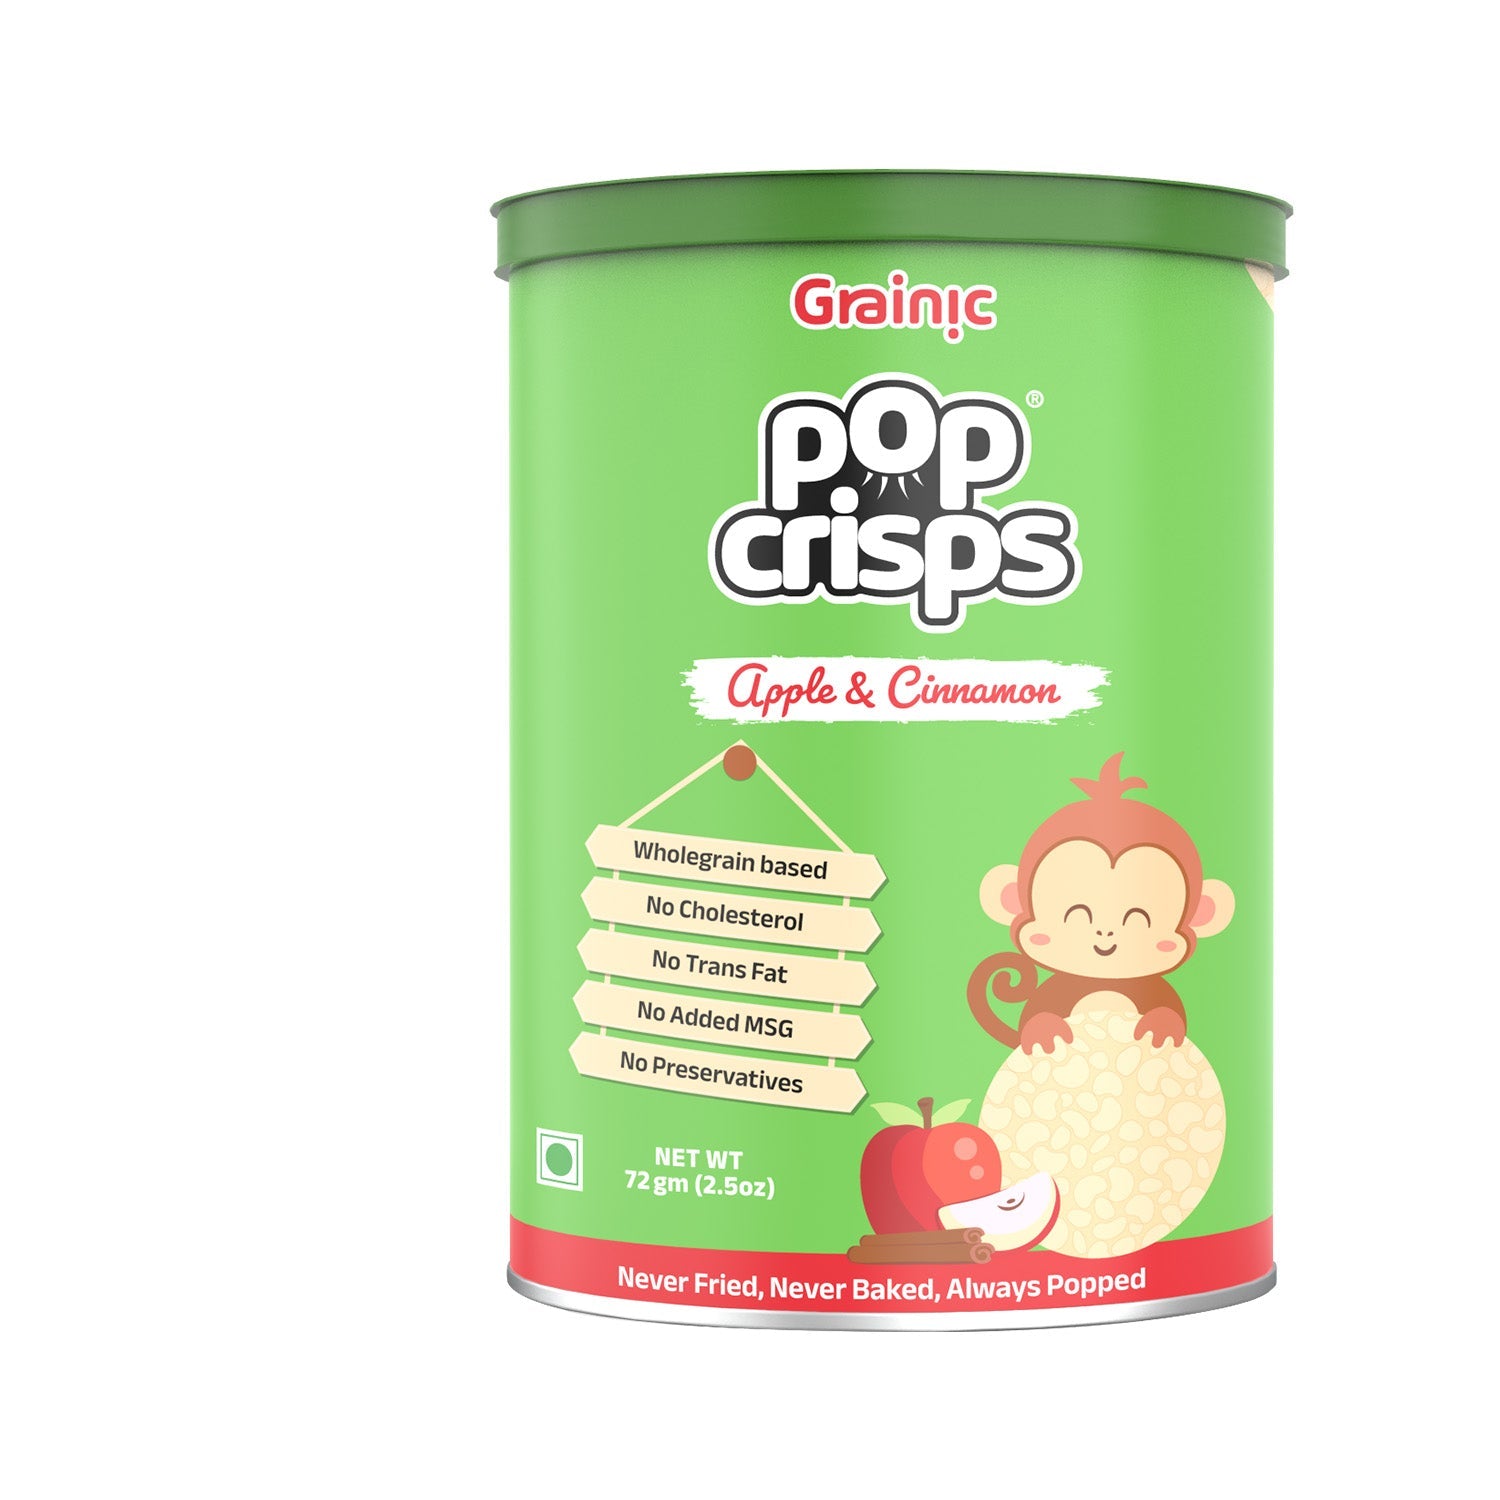 PopCrisps- Assorted Popped Rice Crisps I Apple & Cinnamon/Salted Caramel/Buttery Chocolate Pack of 6